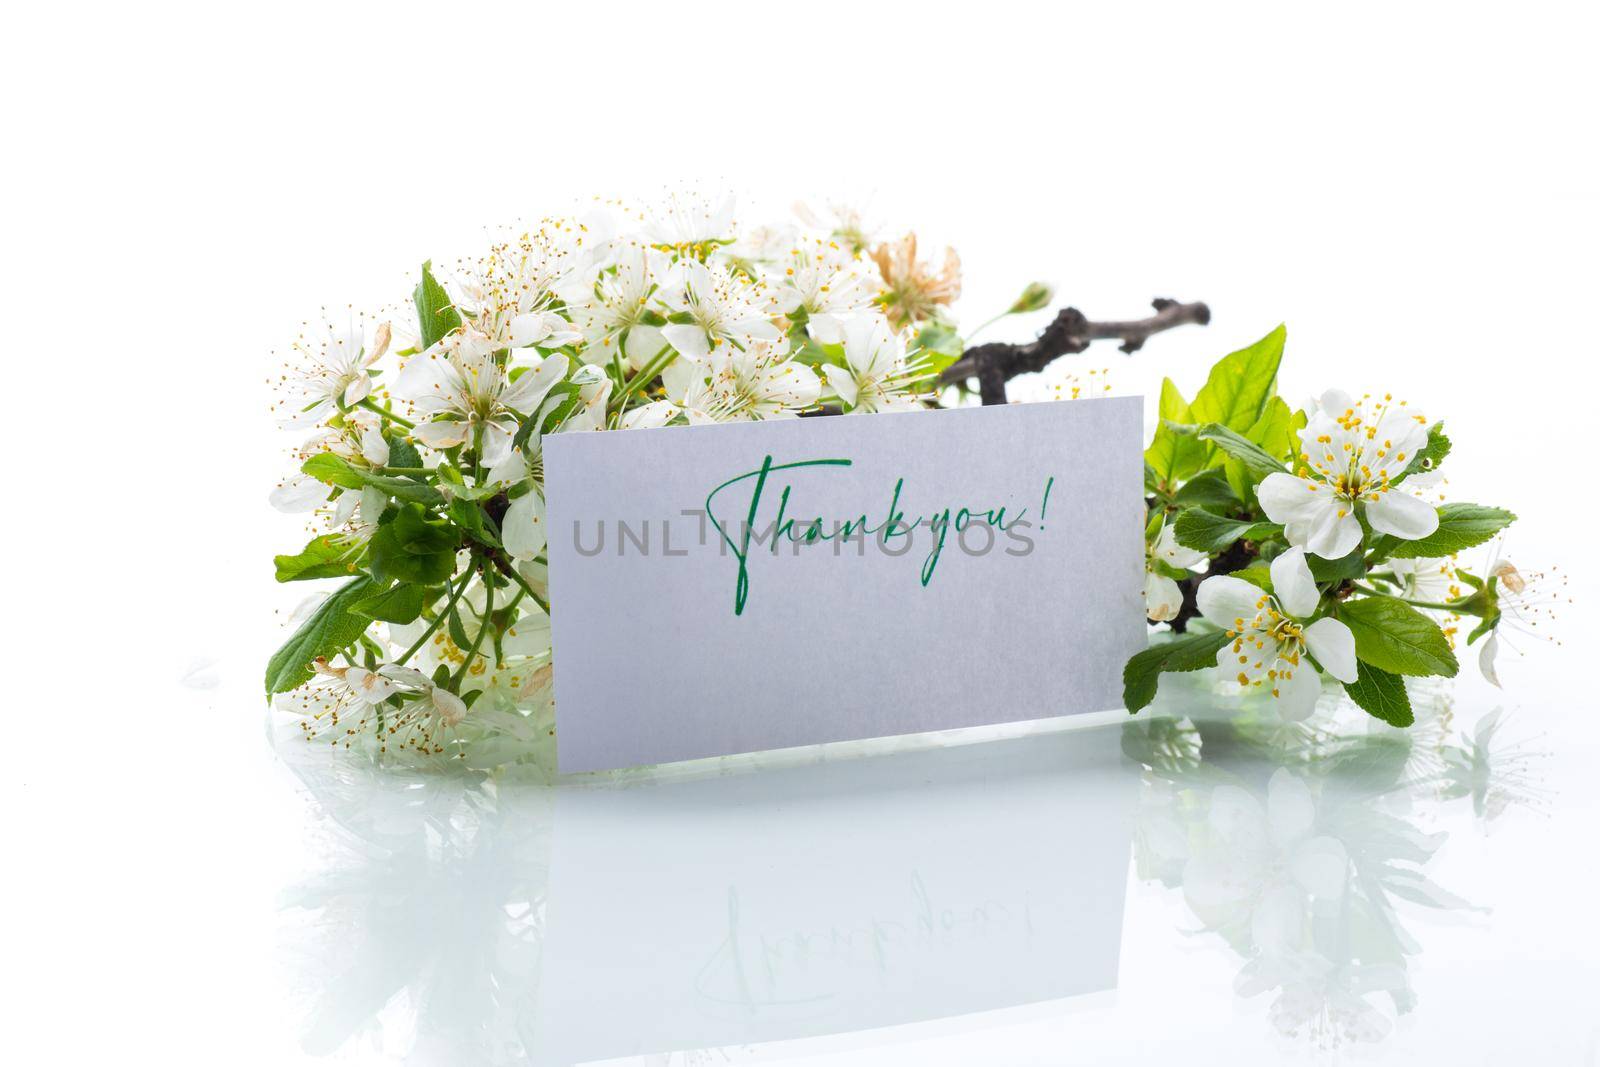 thank you card and blooming spring branch with flowers isolated on white background